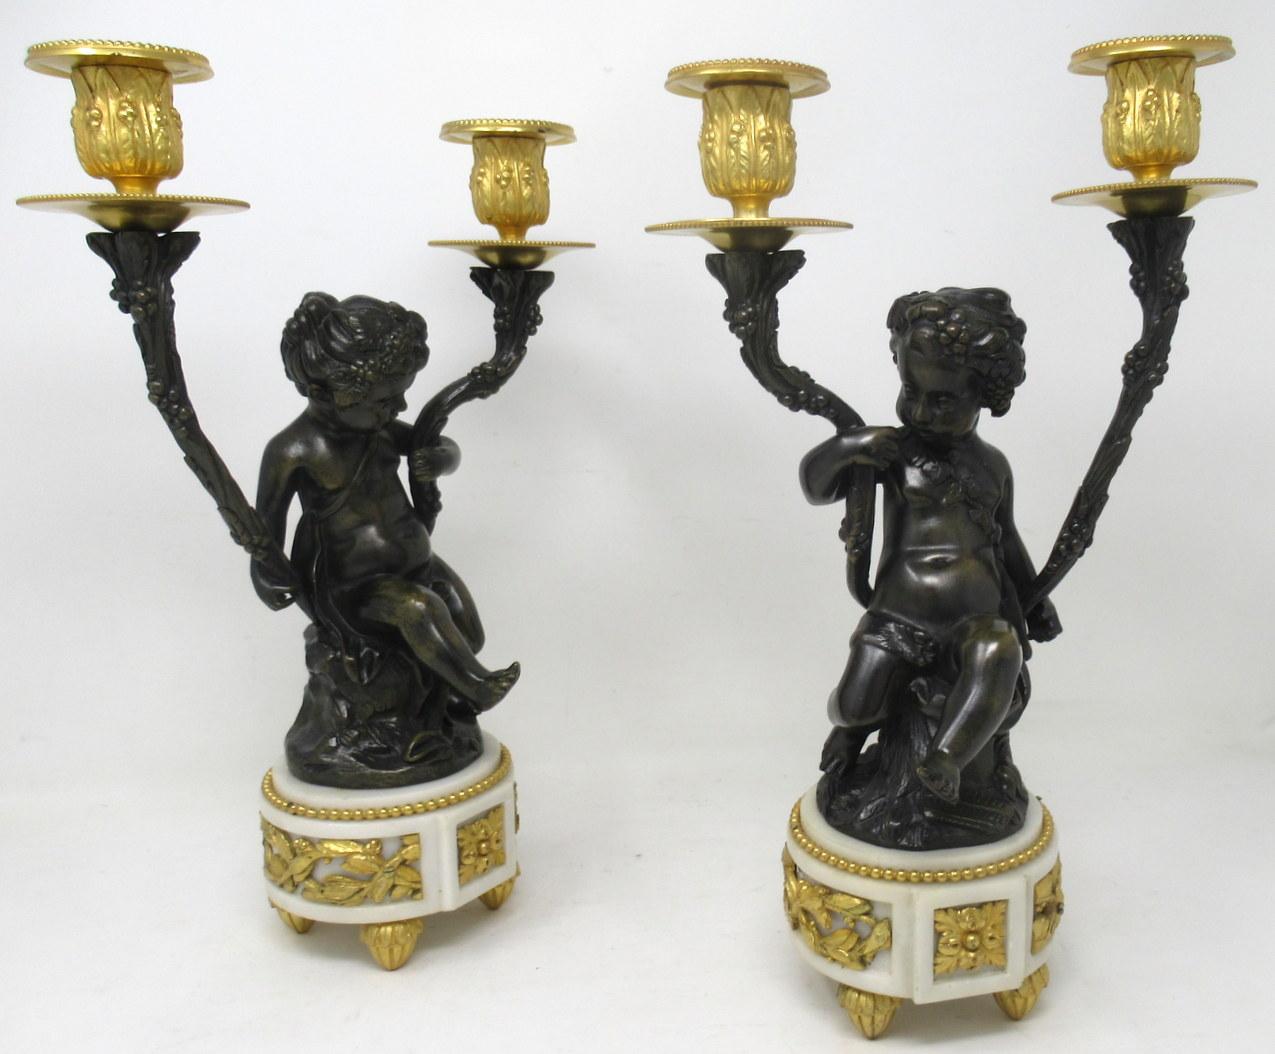 A very fine quality pair of French Louis XV inspired patinated and gilt bronze figural twin branch candelabra depicting Bacchanal Figures of seated Winged Cherubs or Putto. Both with finely sculped features and mounted atop naturalistically modelled